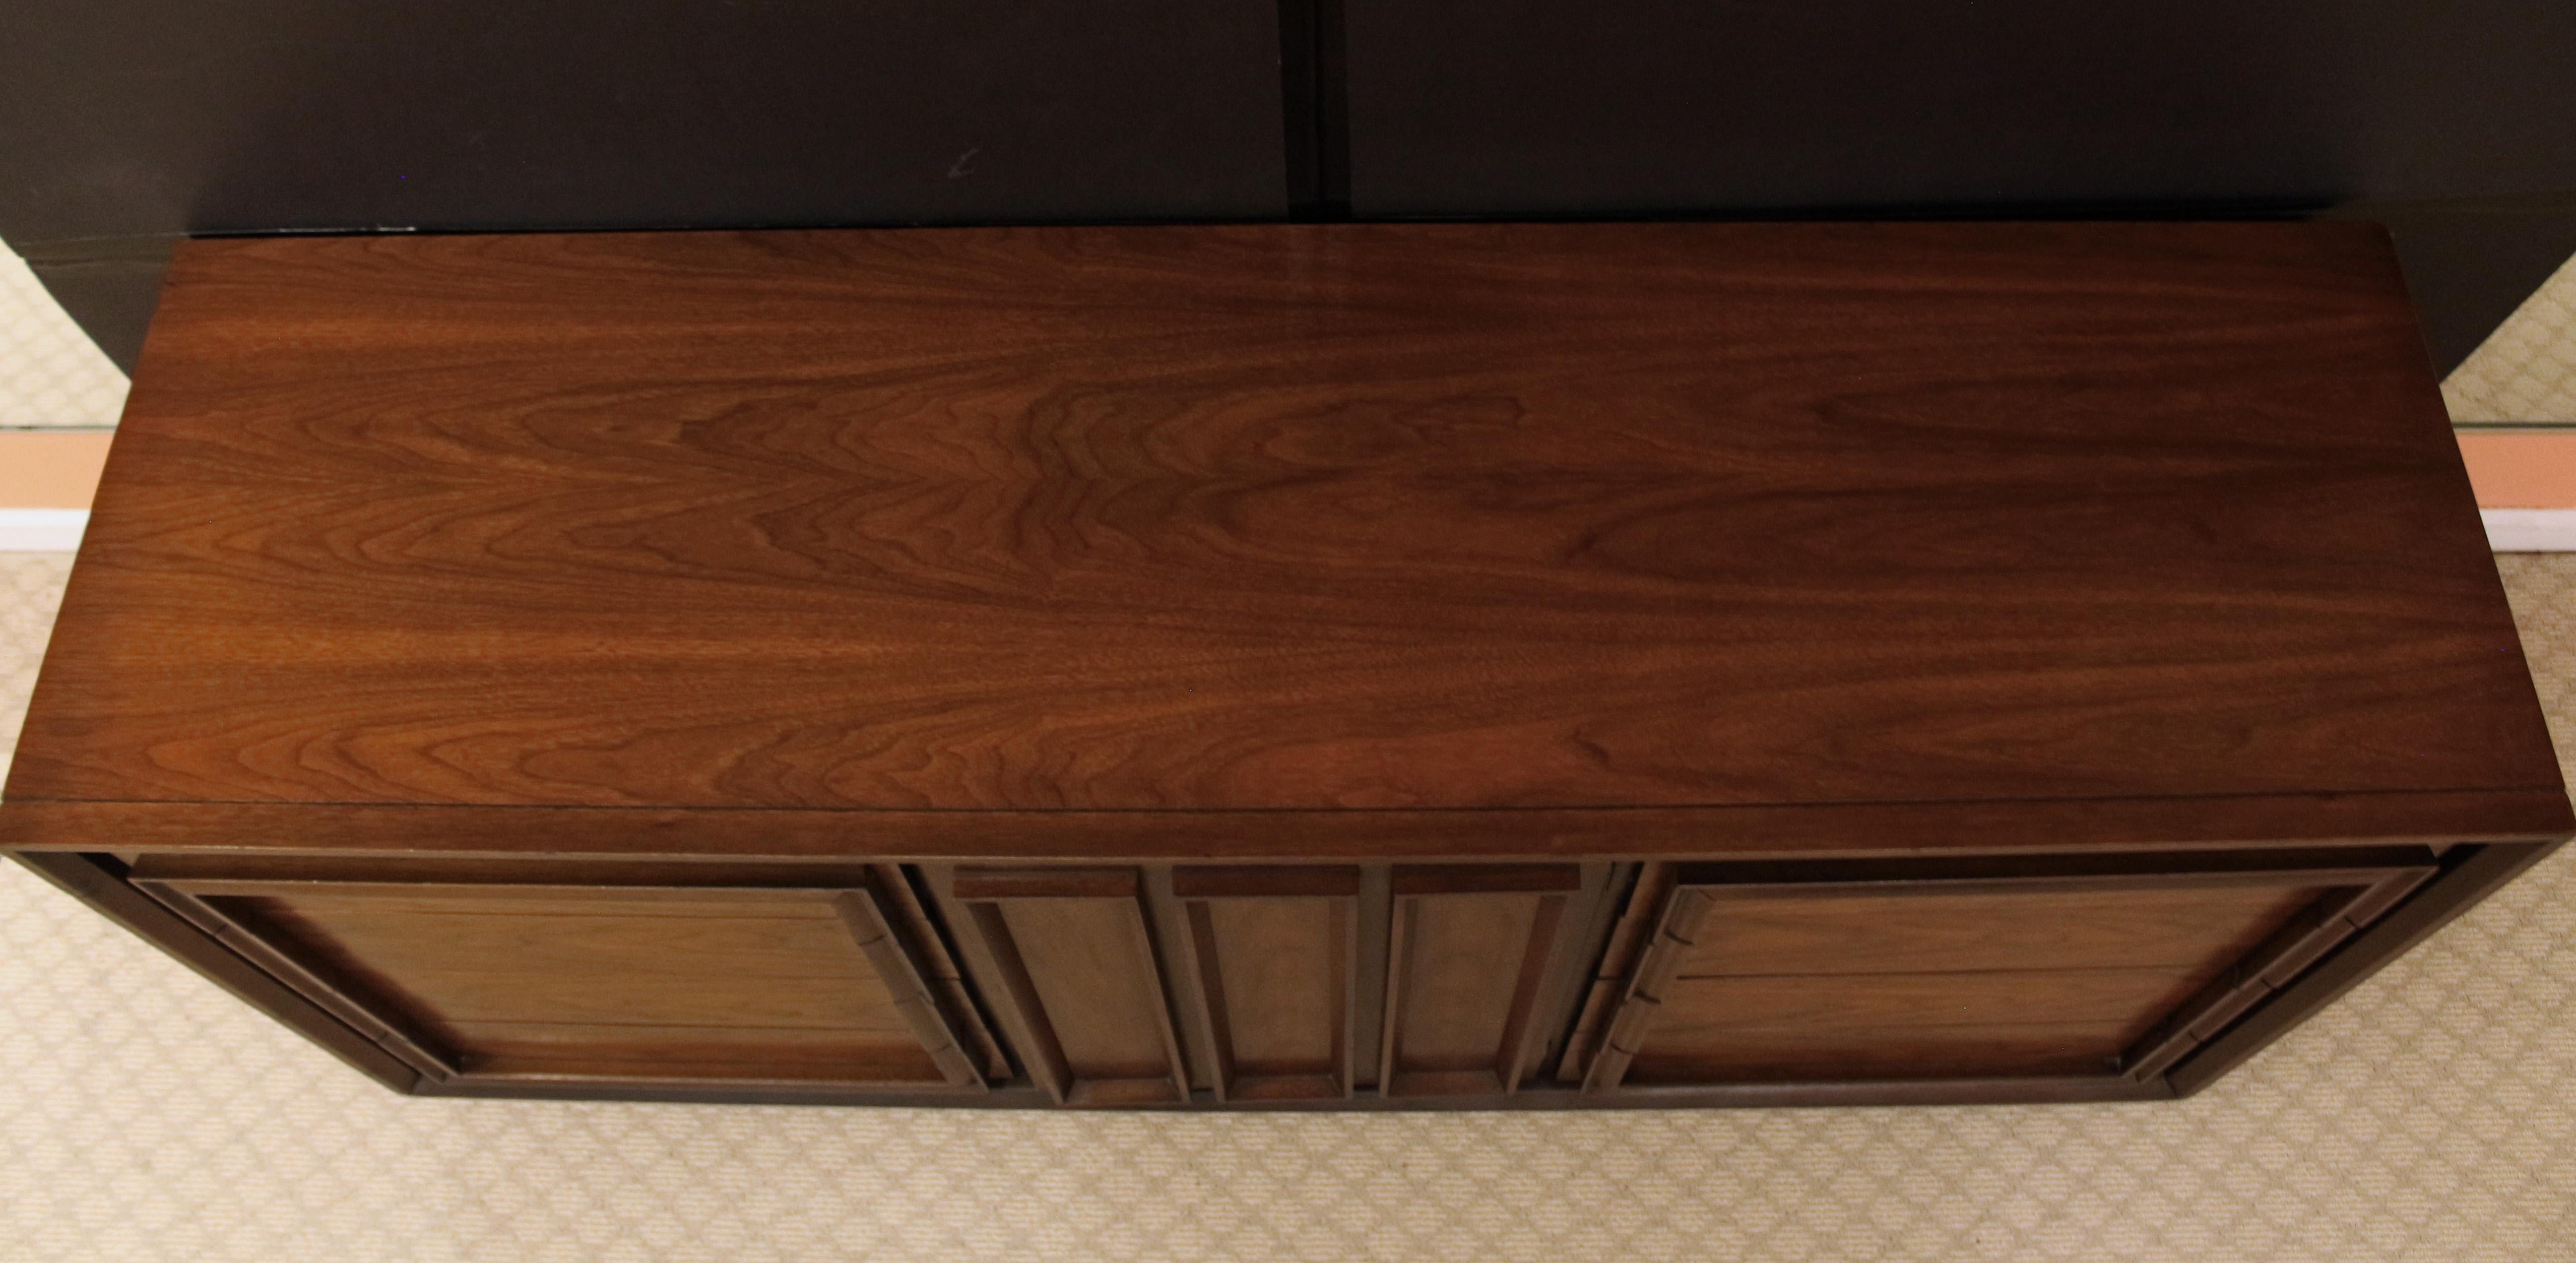 North American circa 1960s Mid-Century Modern Low Dresser or Credenza For Sale